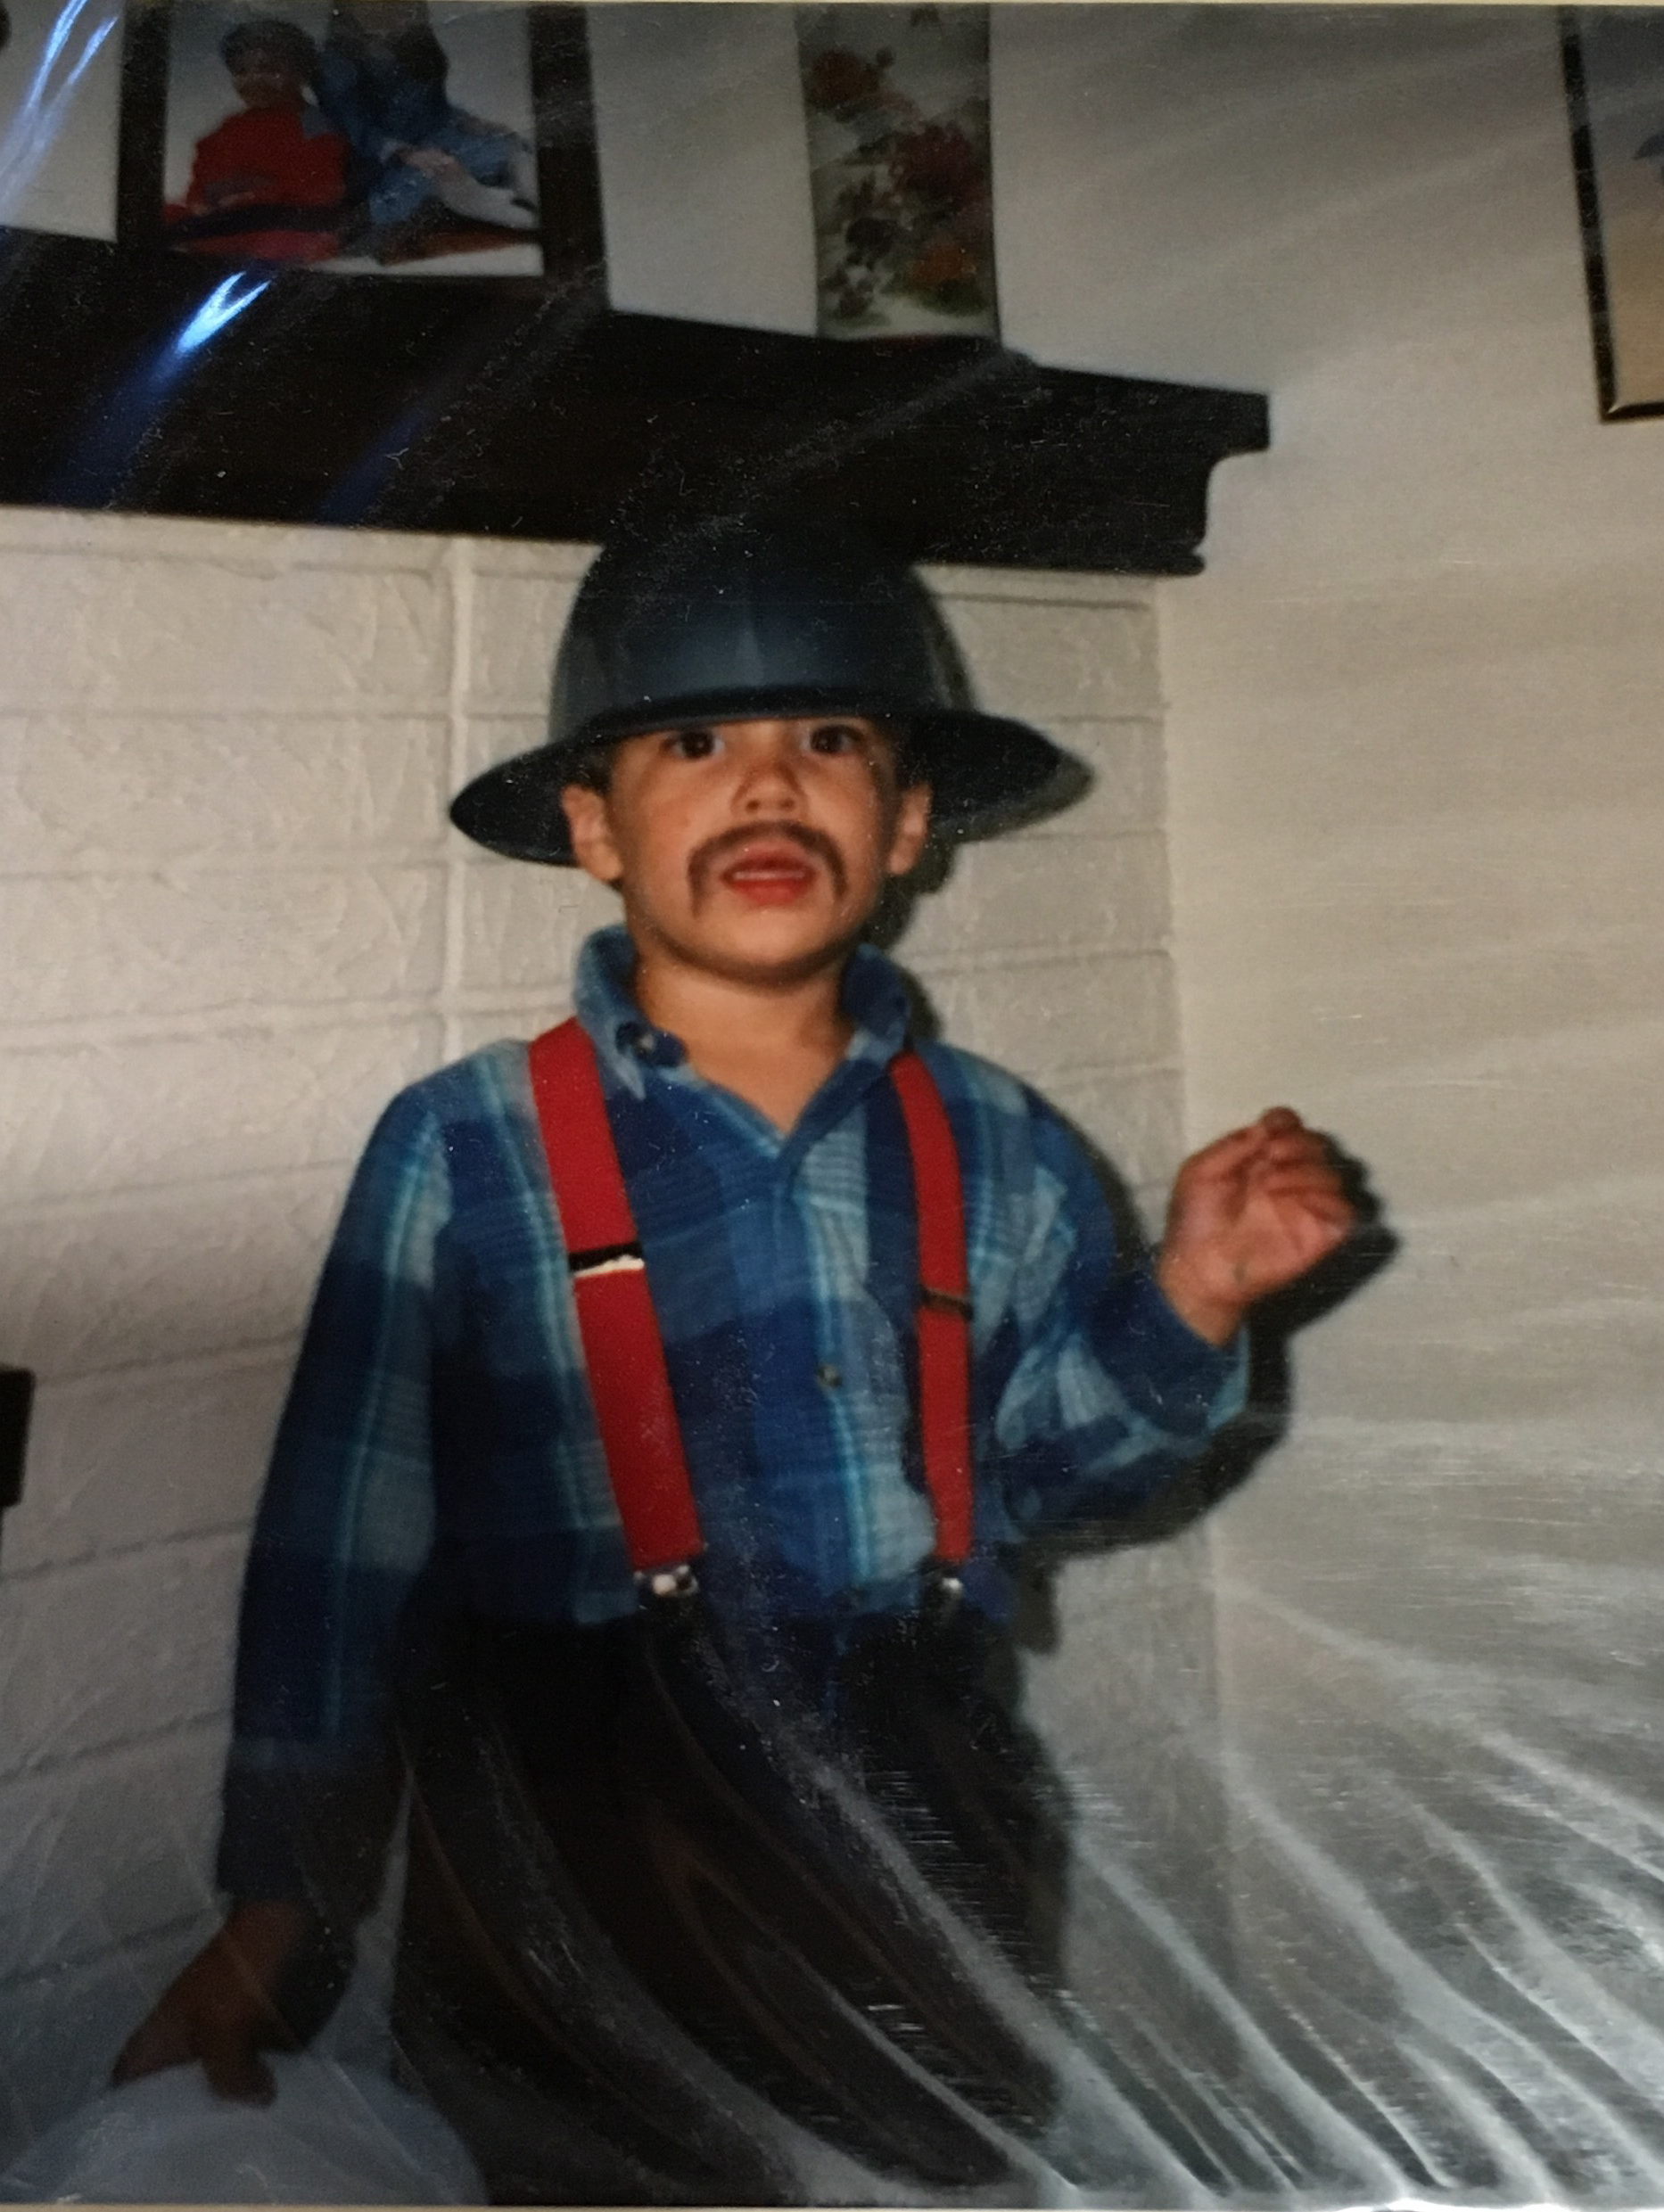 That one year I dressed up as a construction worker.